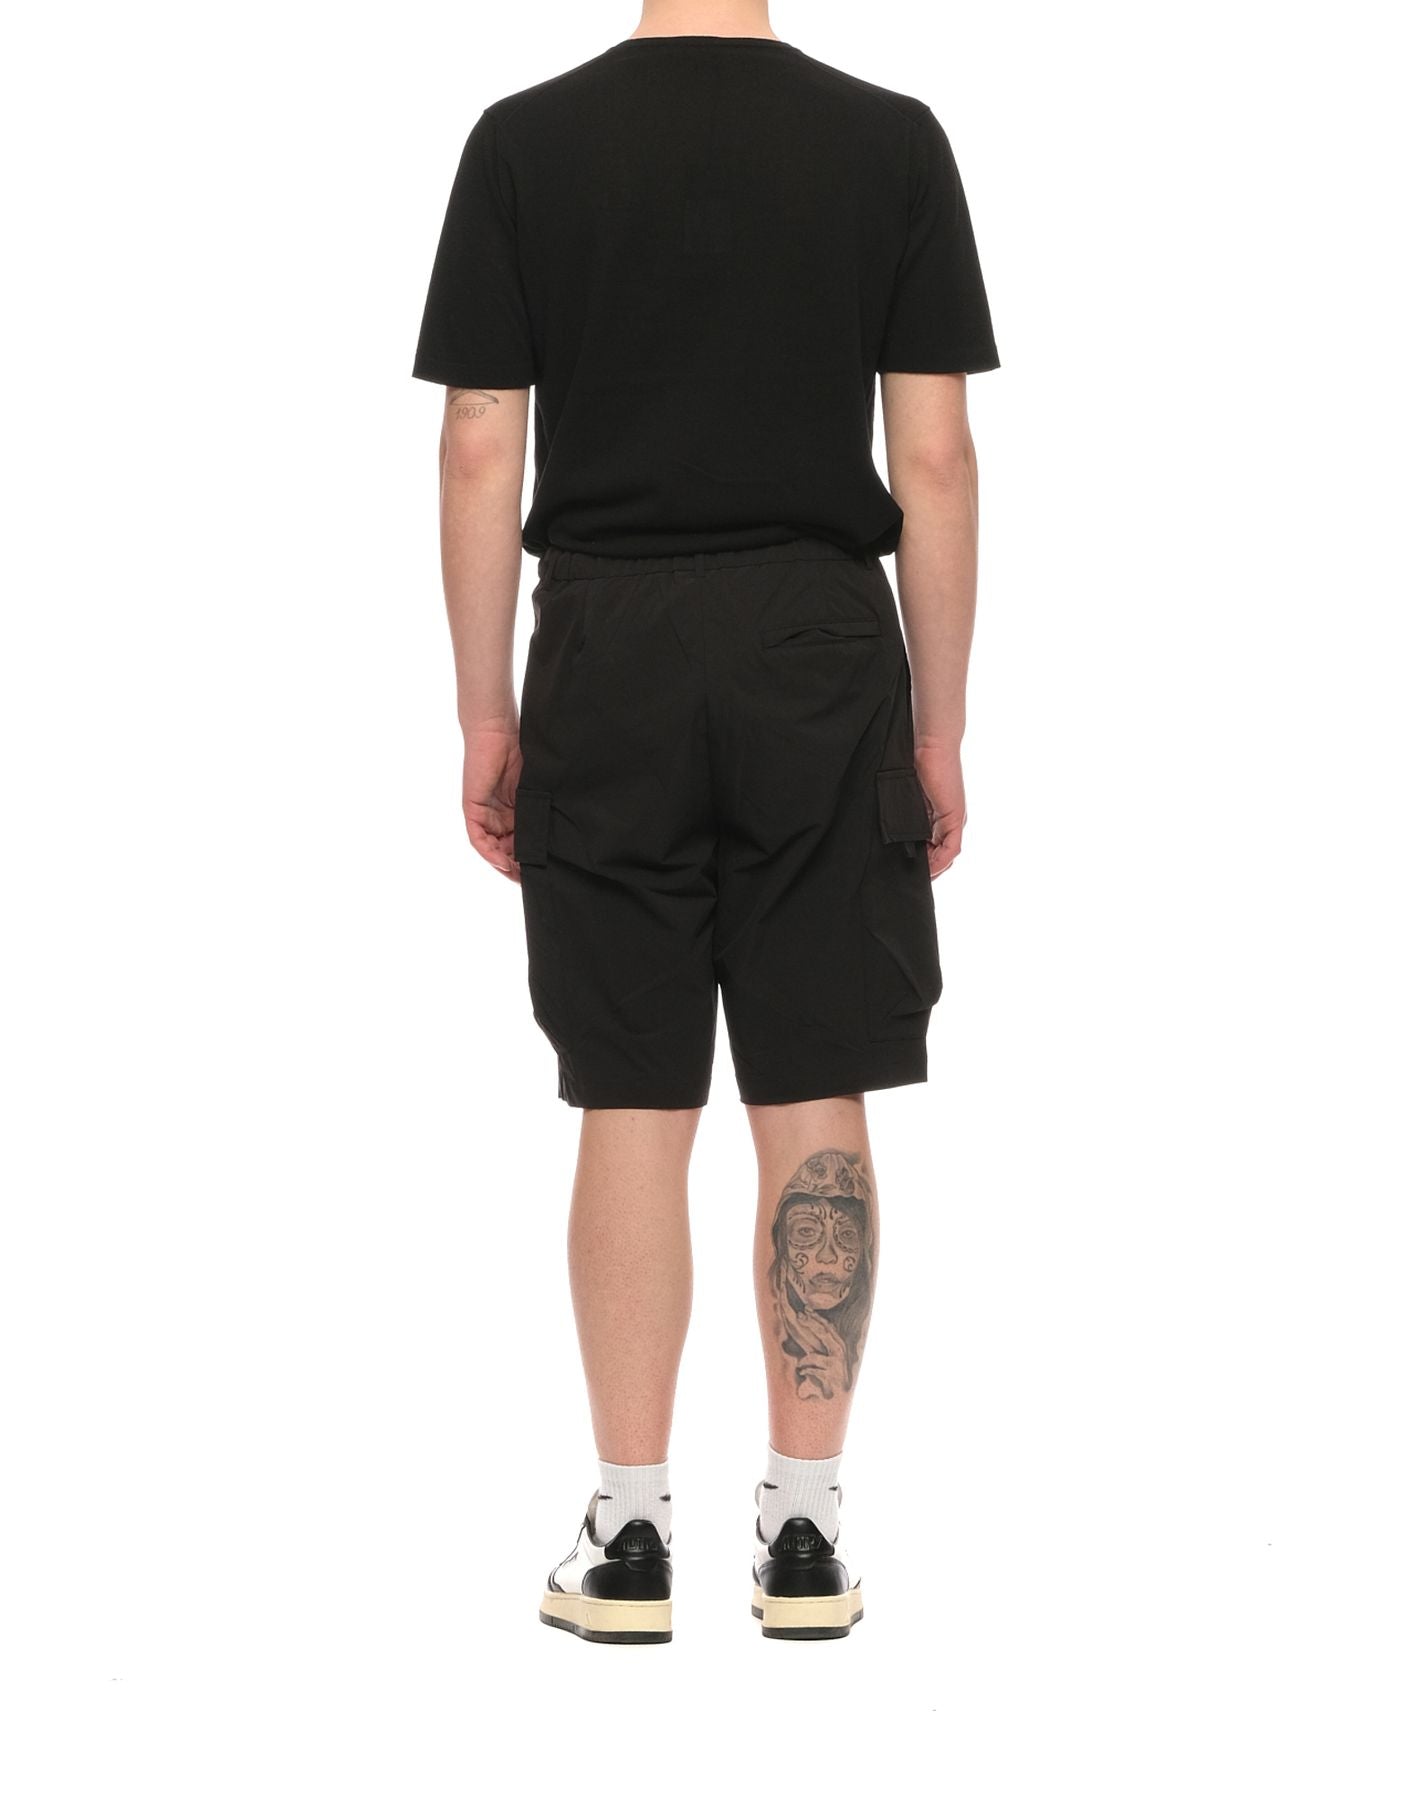 Shorts man EOTM216AE42 BLACK OUTHERE